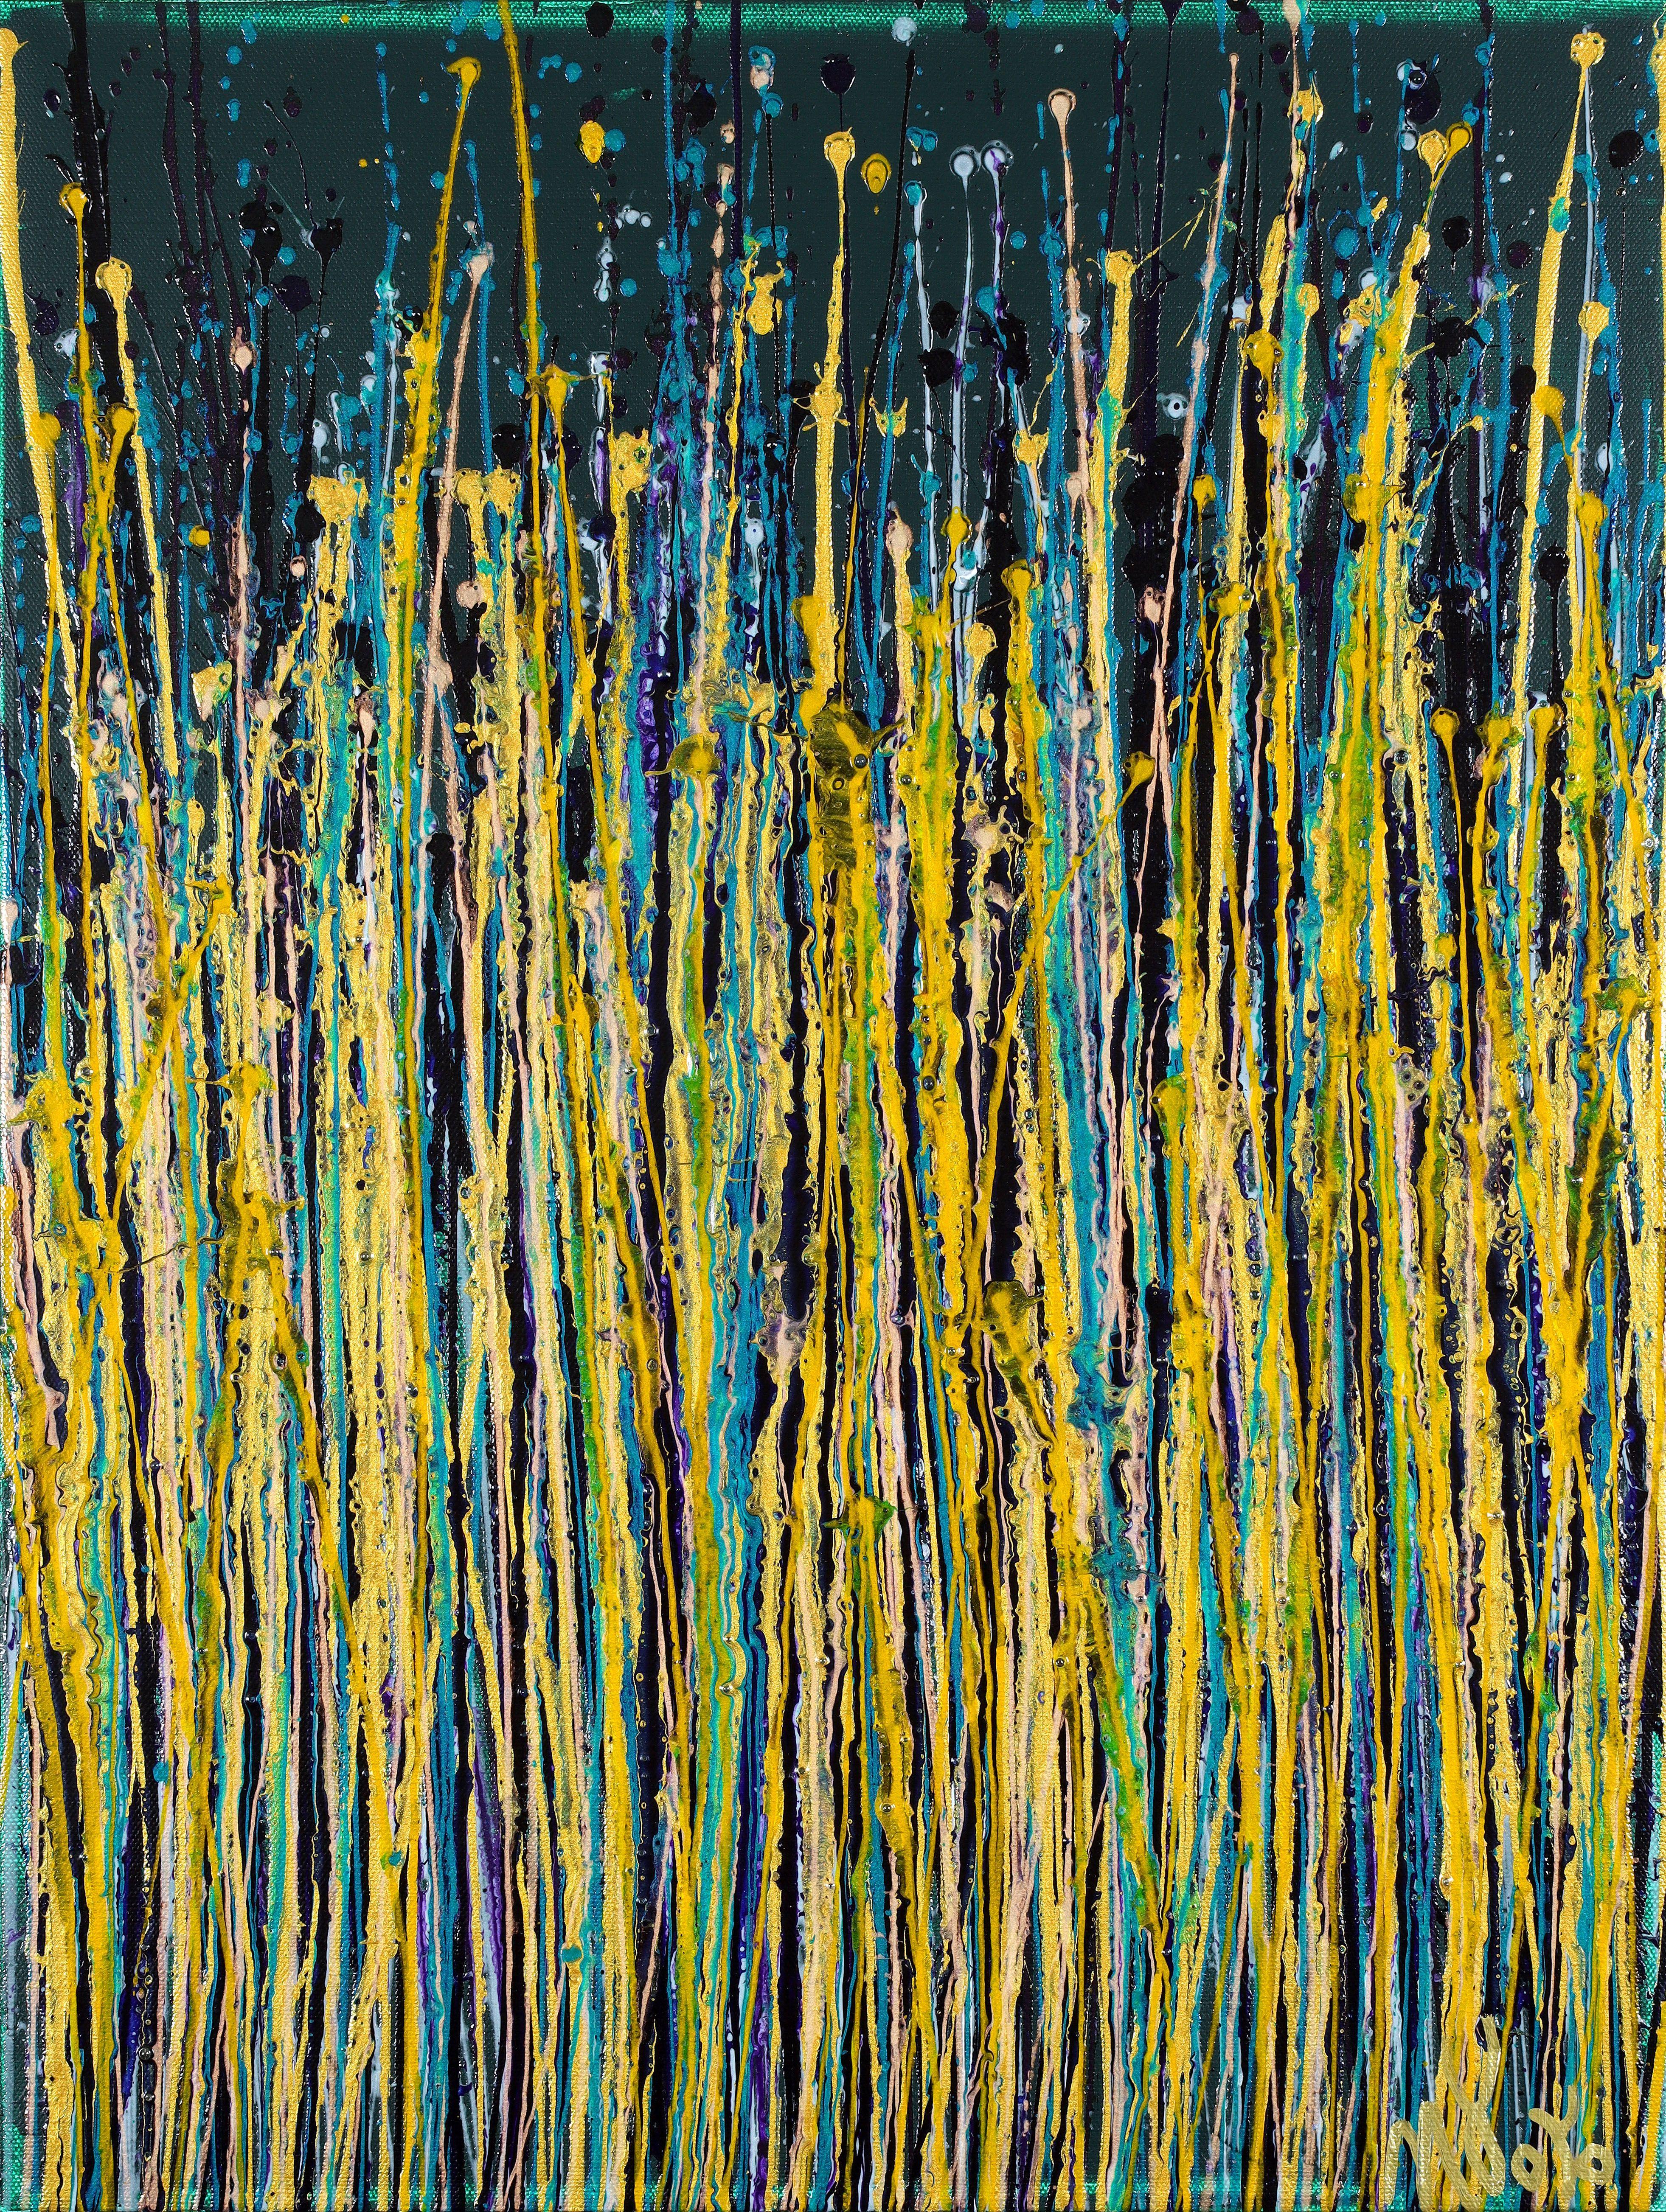 This radiant modern abstract was created blending iridescent drizzles of acrylic paint in random yet calming pattern. A color palette of gold, yellow, turquoise, light blue over dark green, most colors mixed with mica for reflectivity and depth.